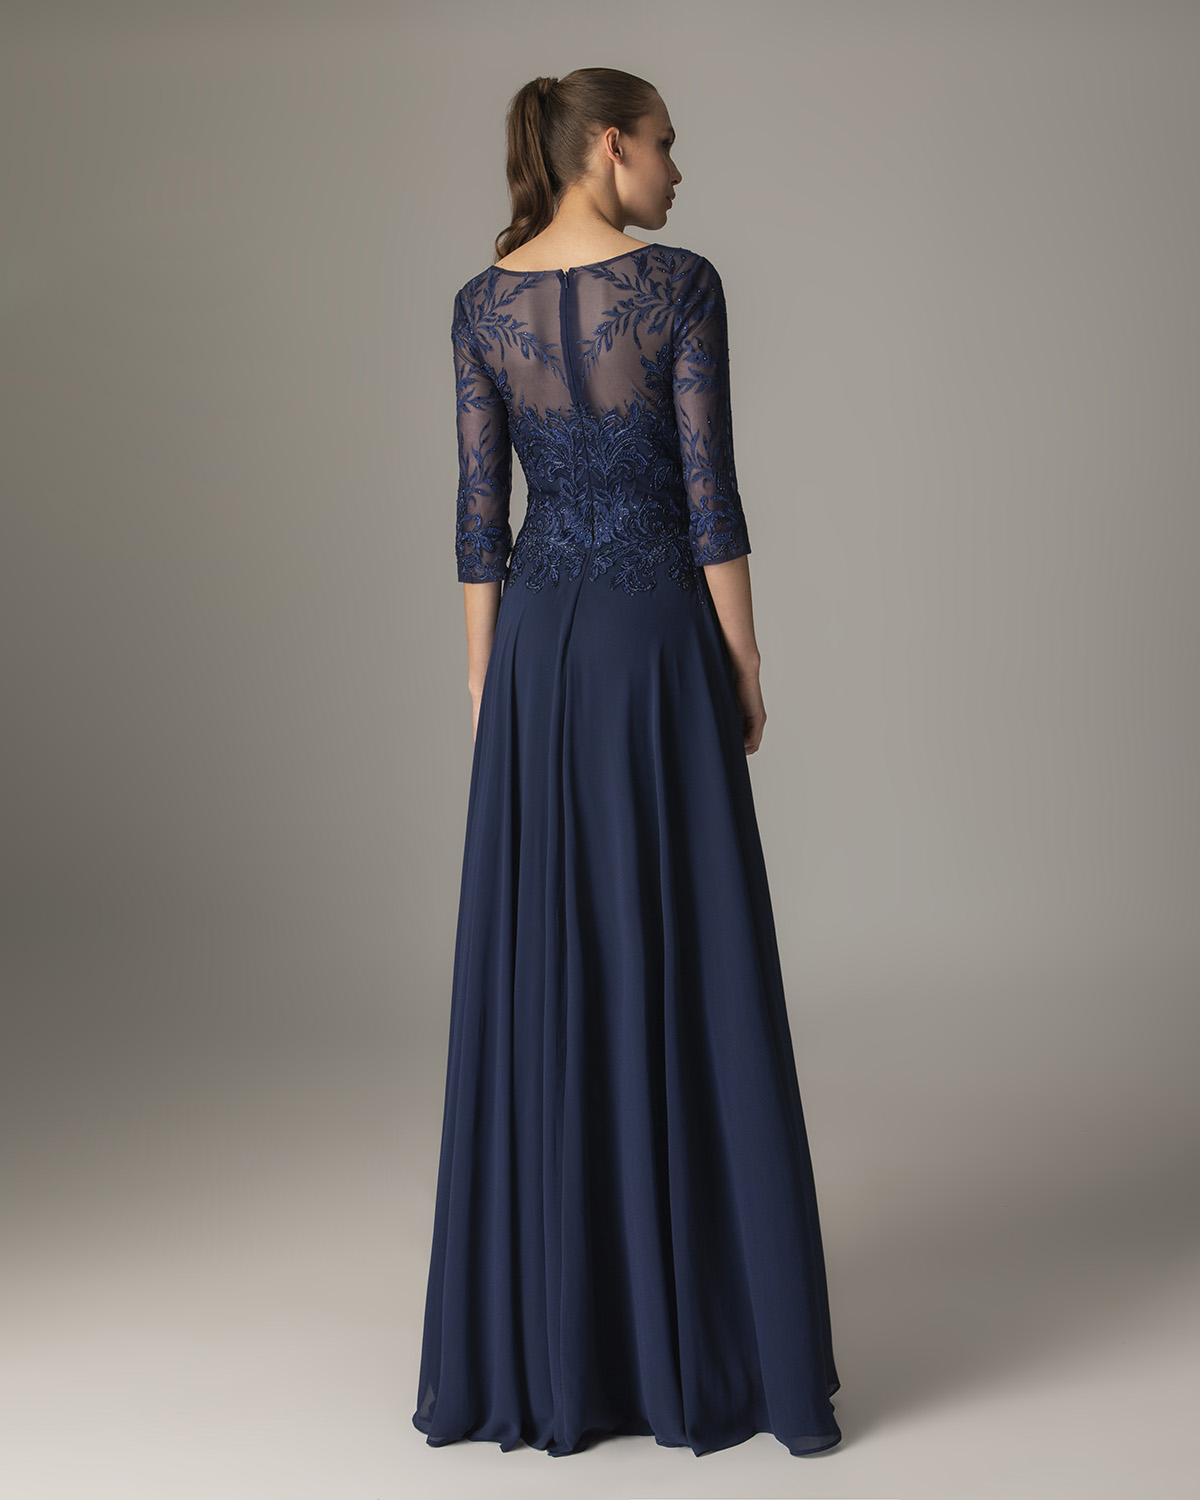 Long chiffon dress with fully beaded top and long sleeves